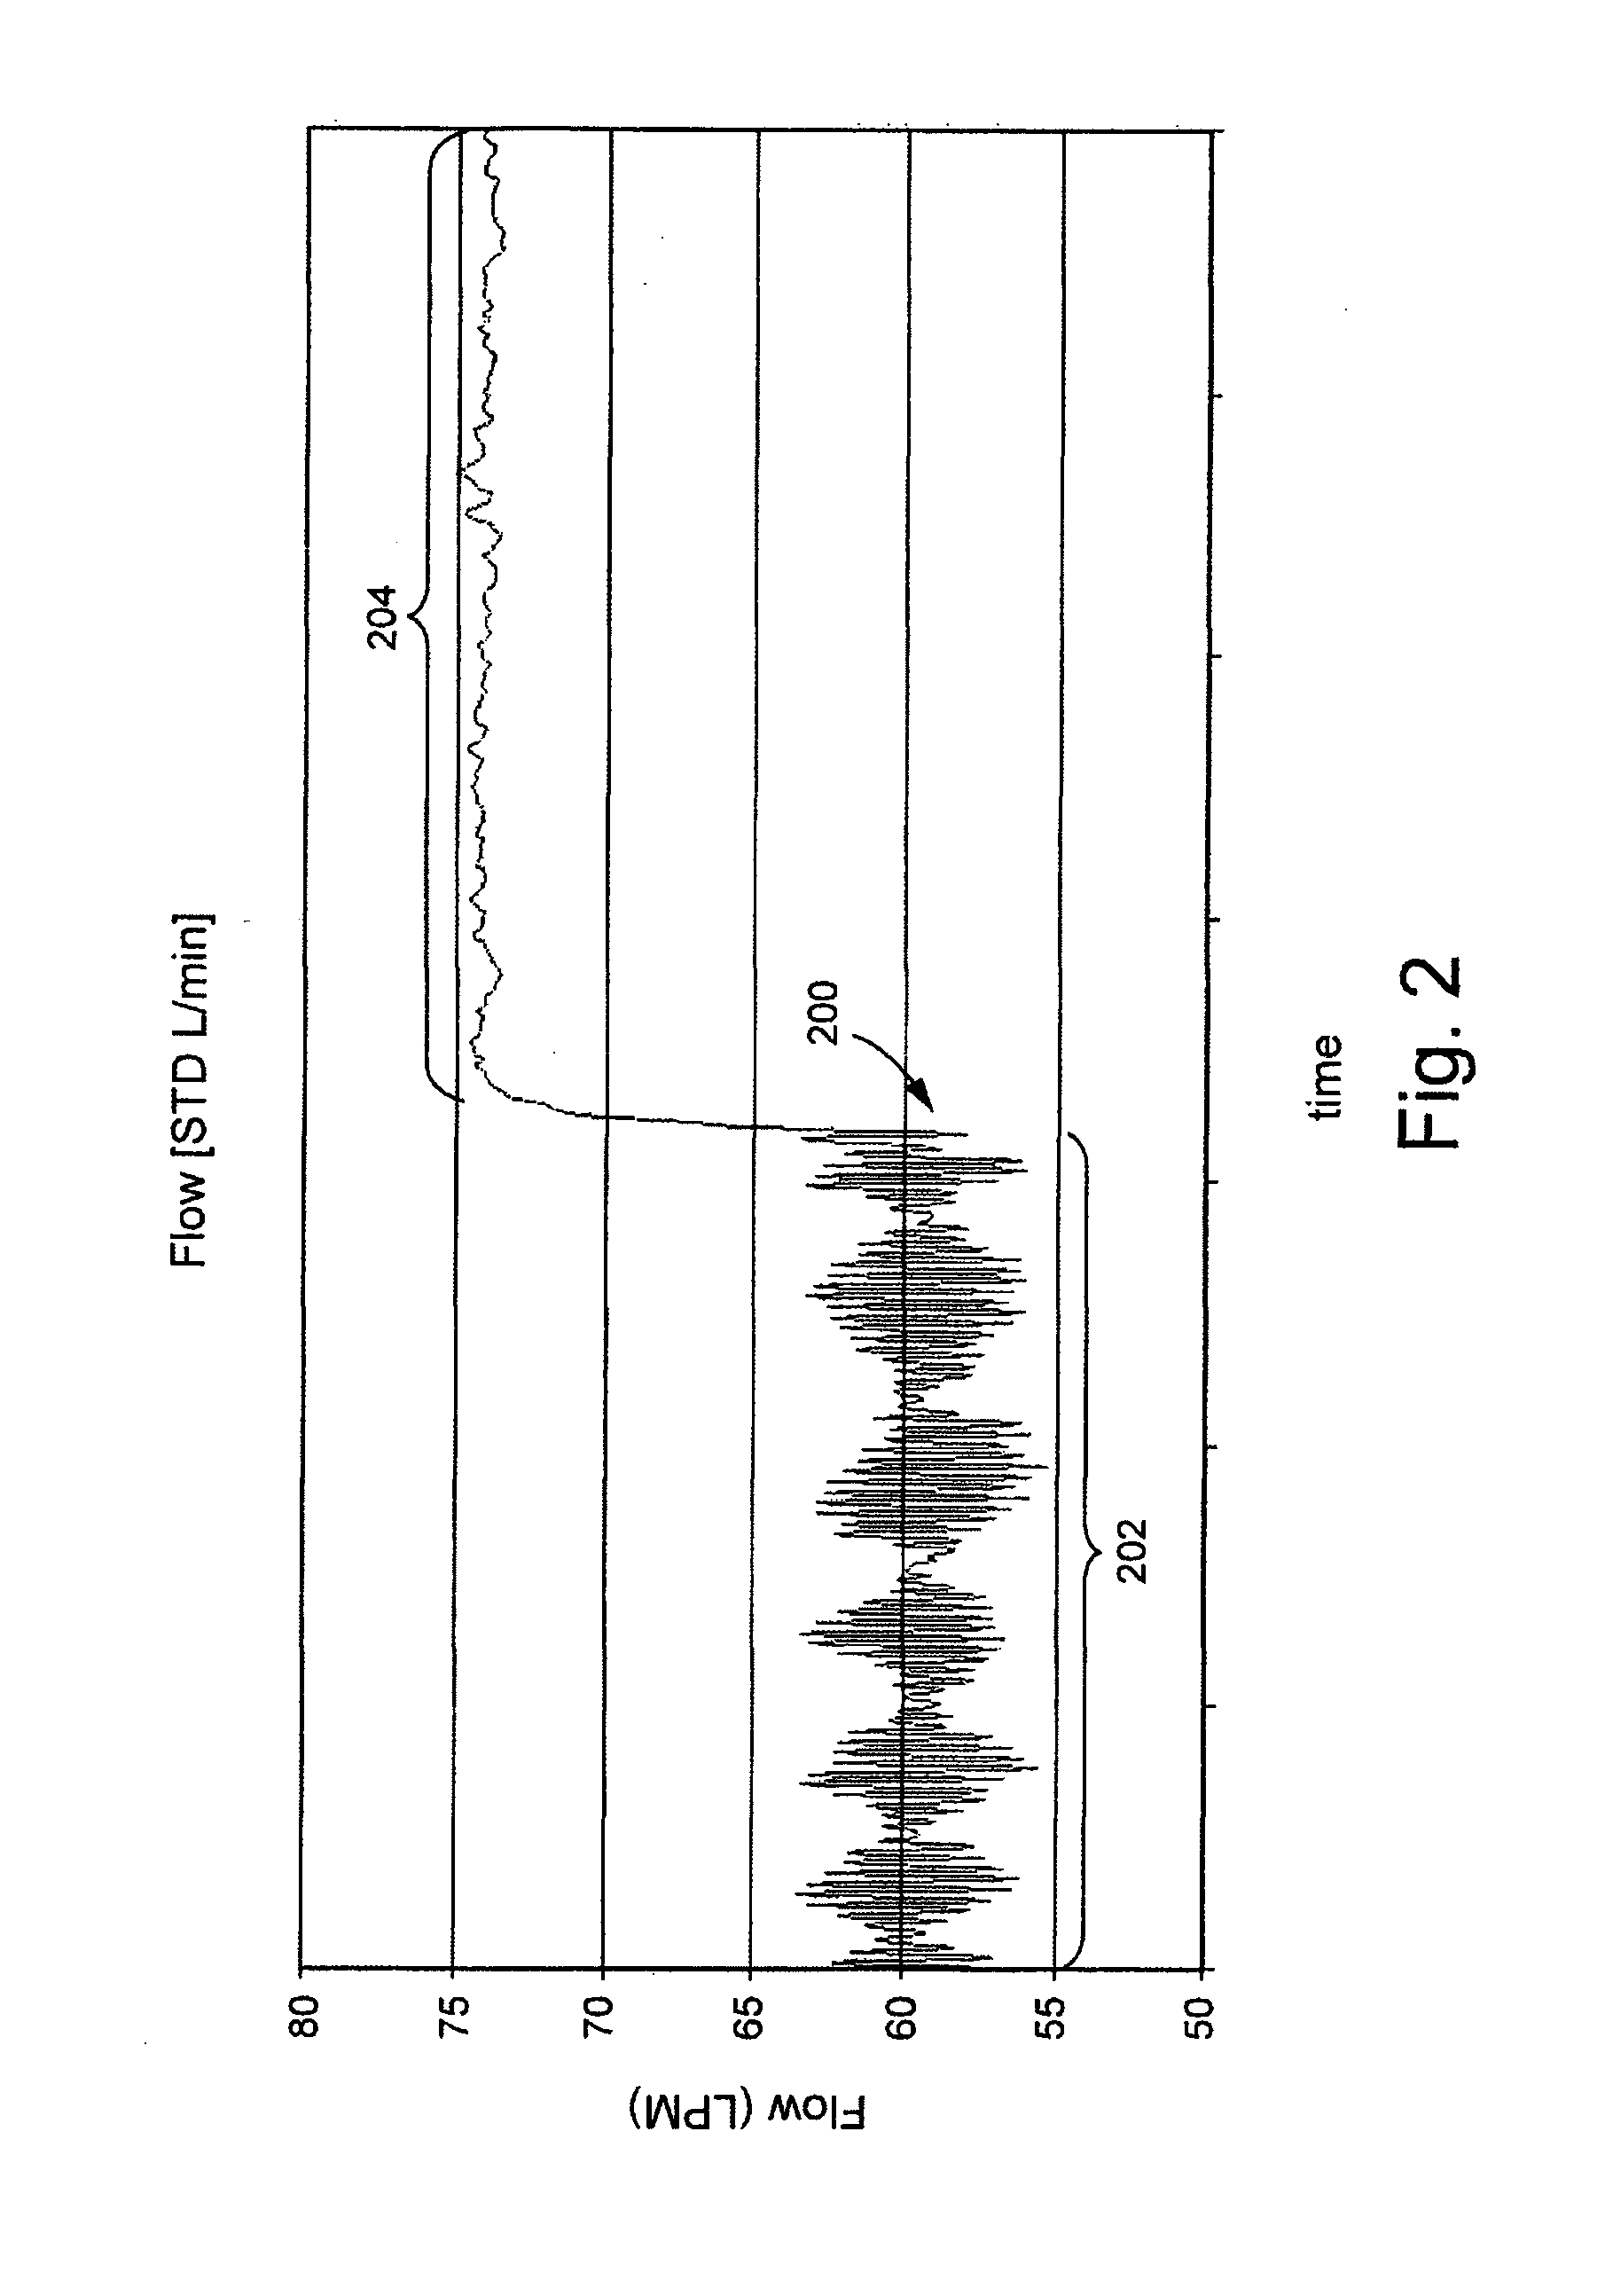 Respiratory resistance systems and methods